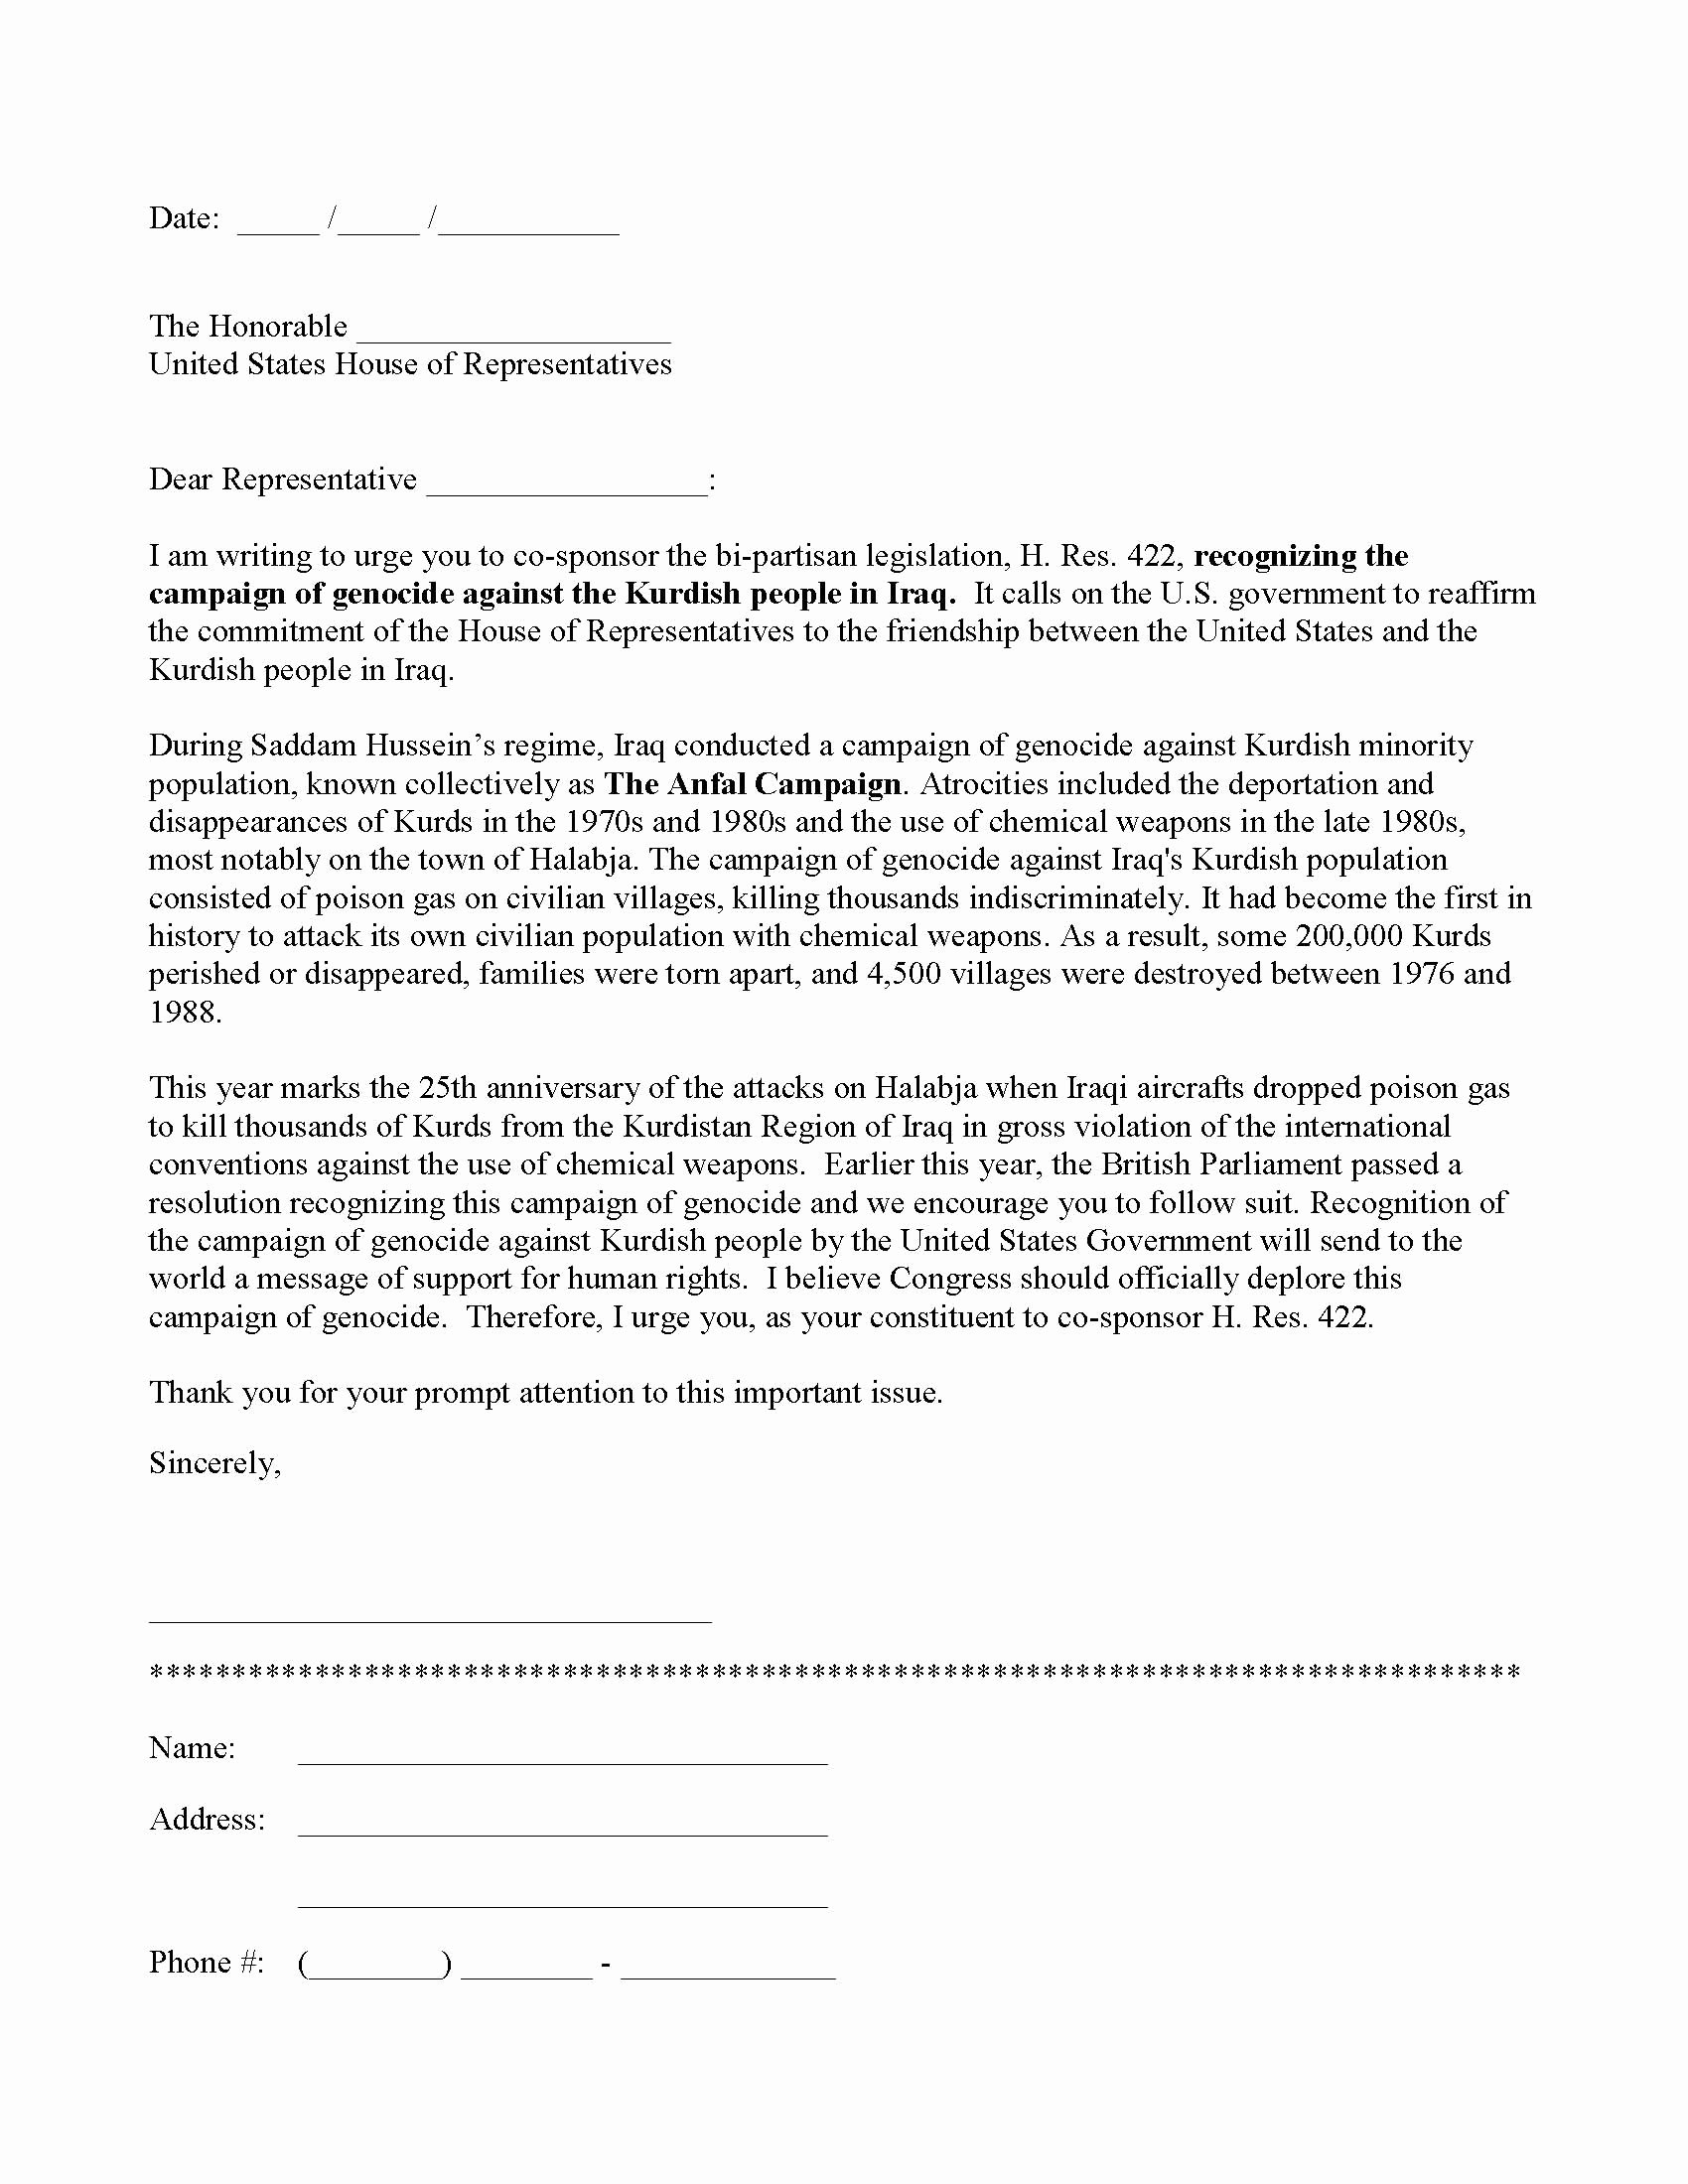 Letter to Congressman format Awesome Letter to Representative format Cover Letter Samples